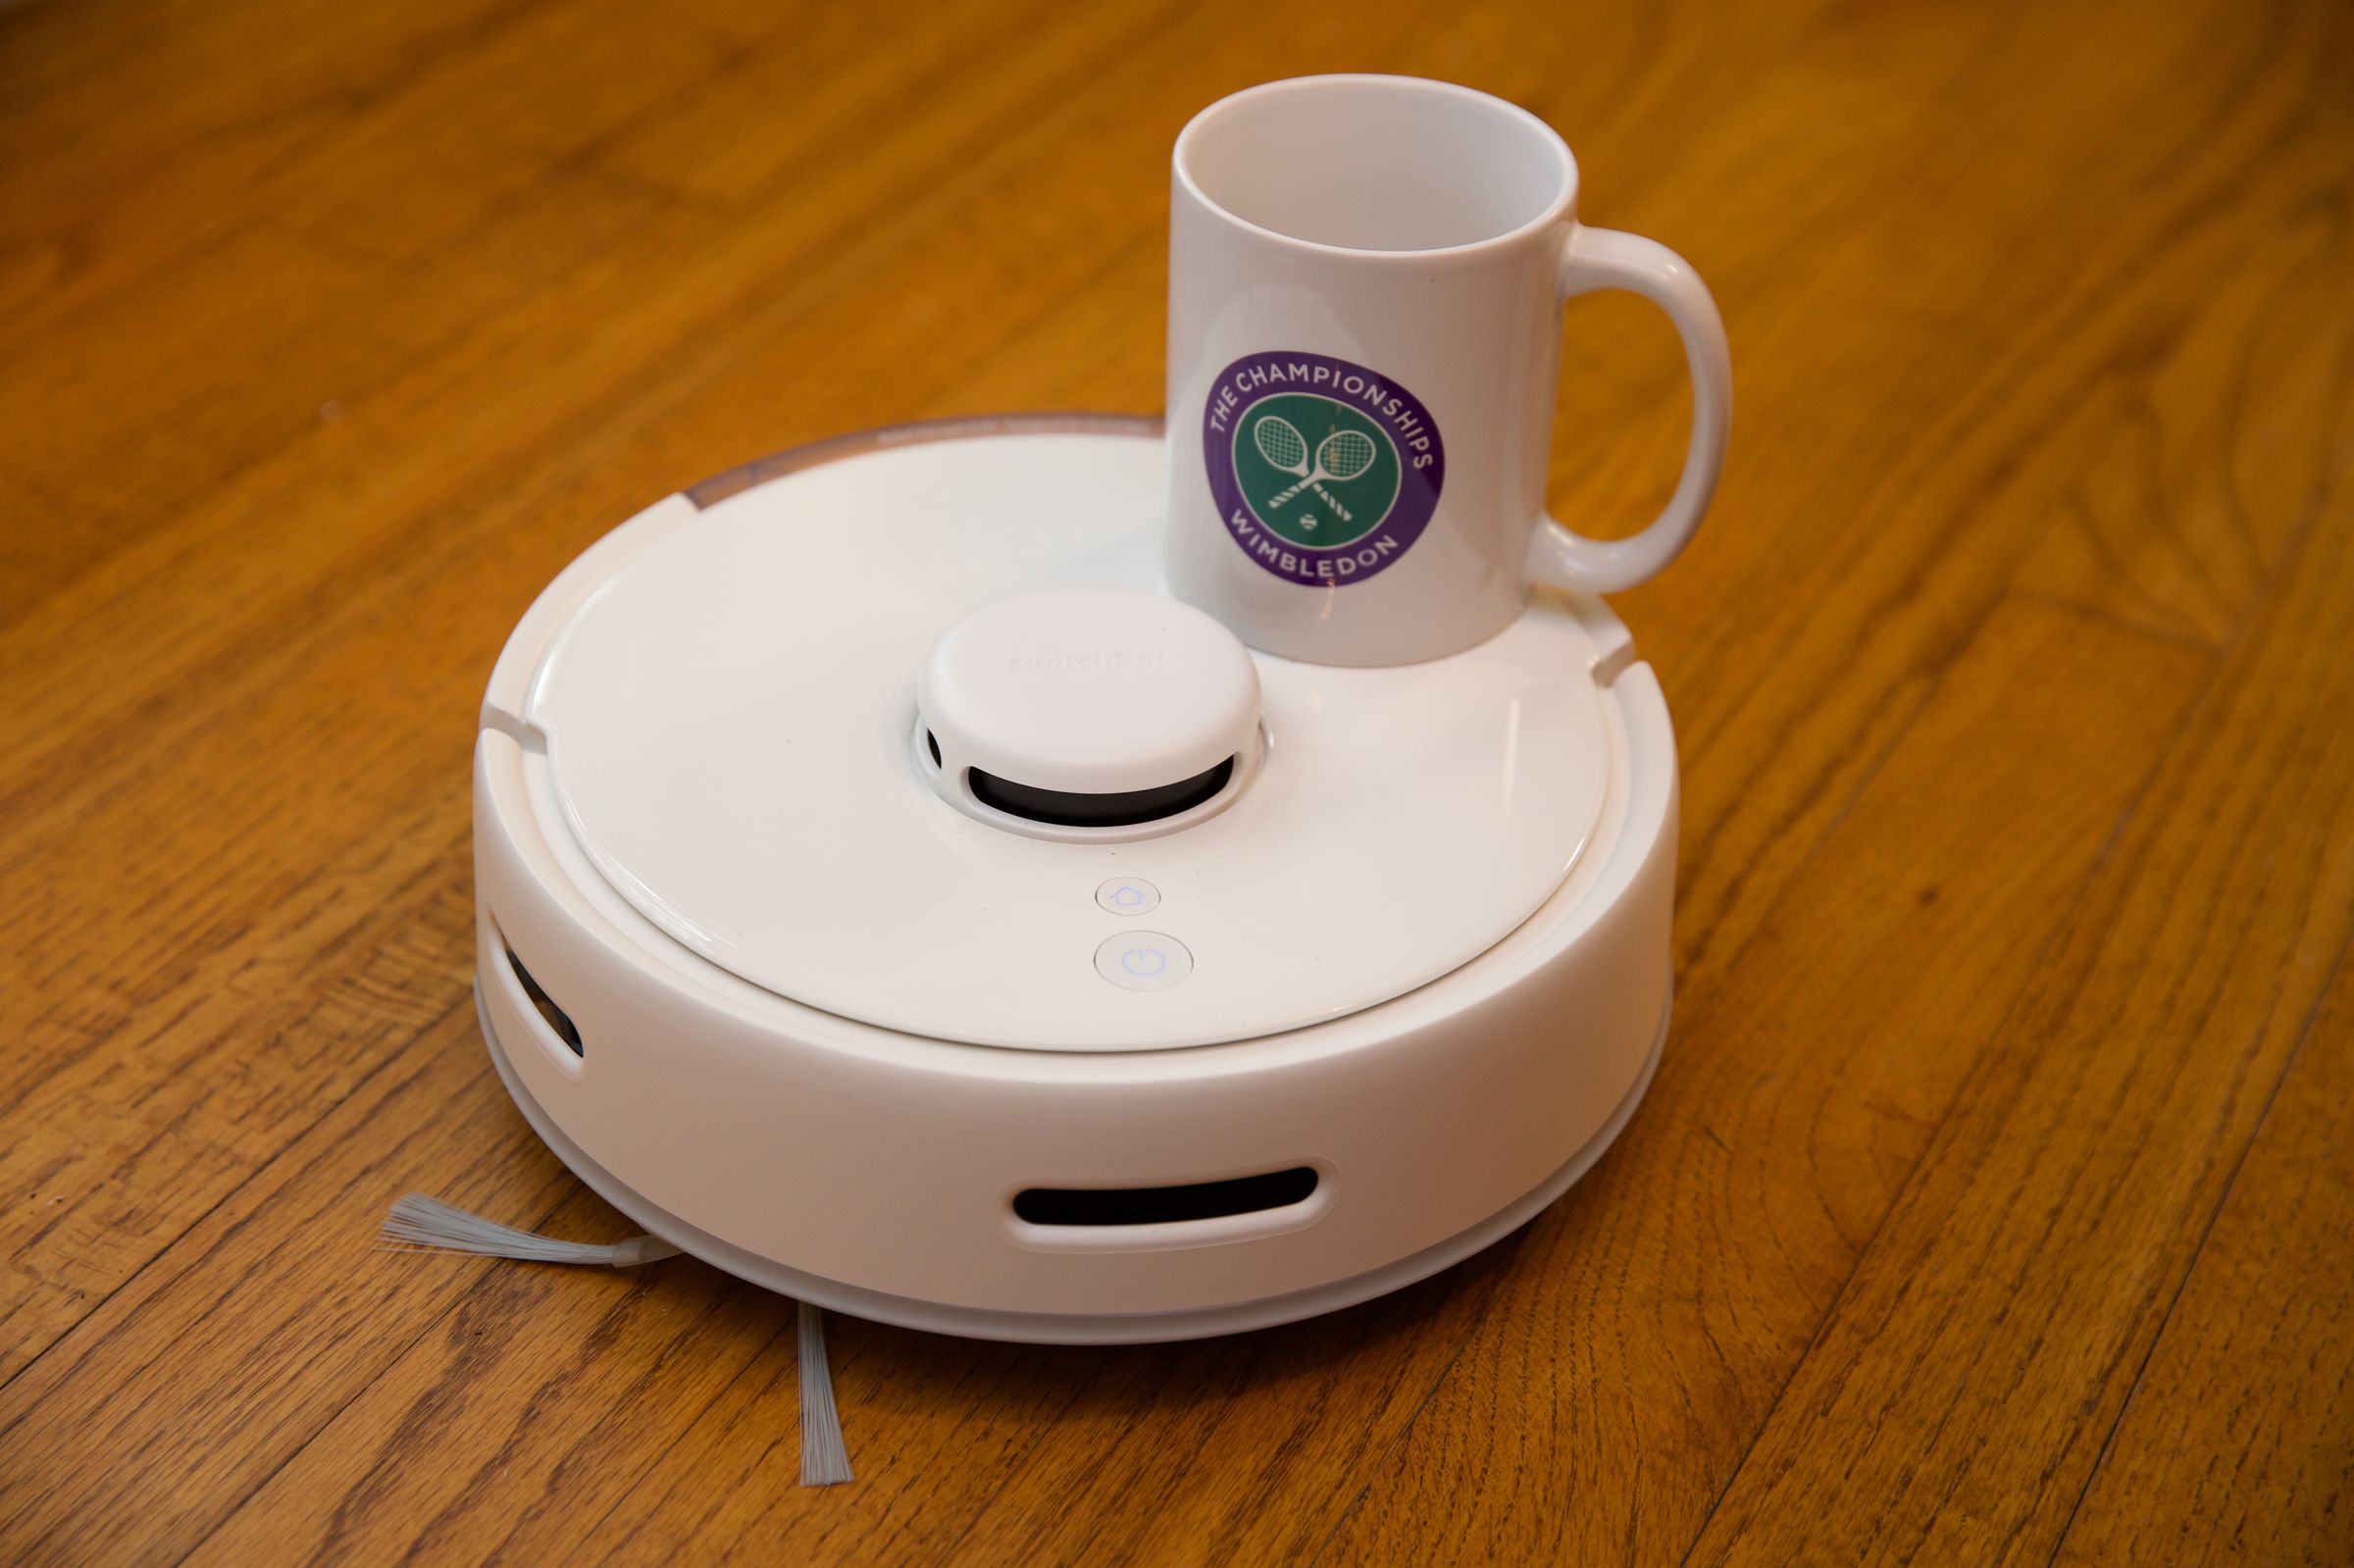 <em>Mug for size, the SwitchBot k10 is very small.</em>